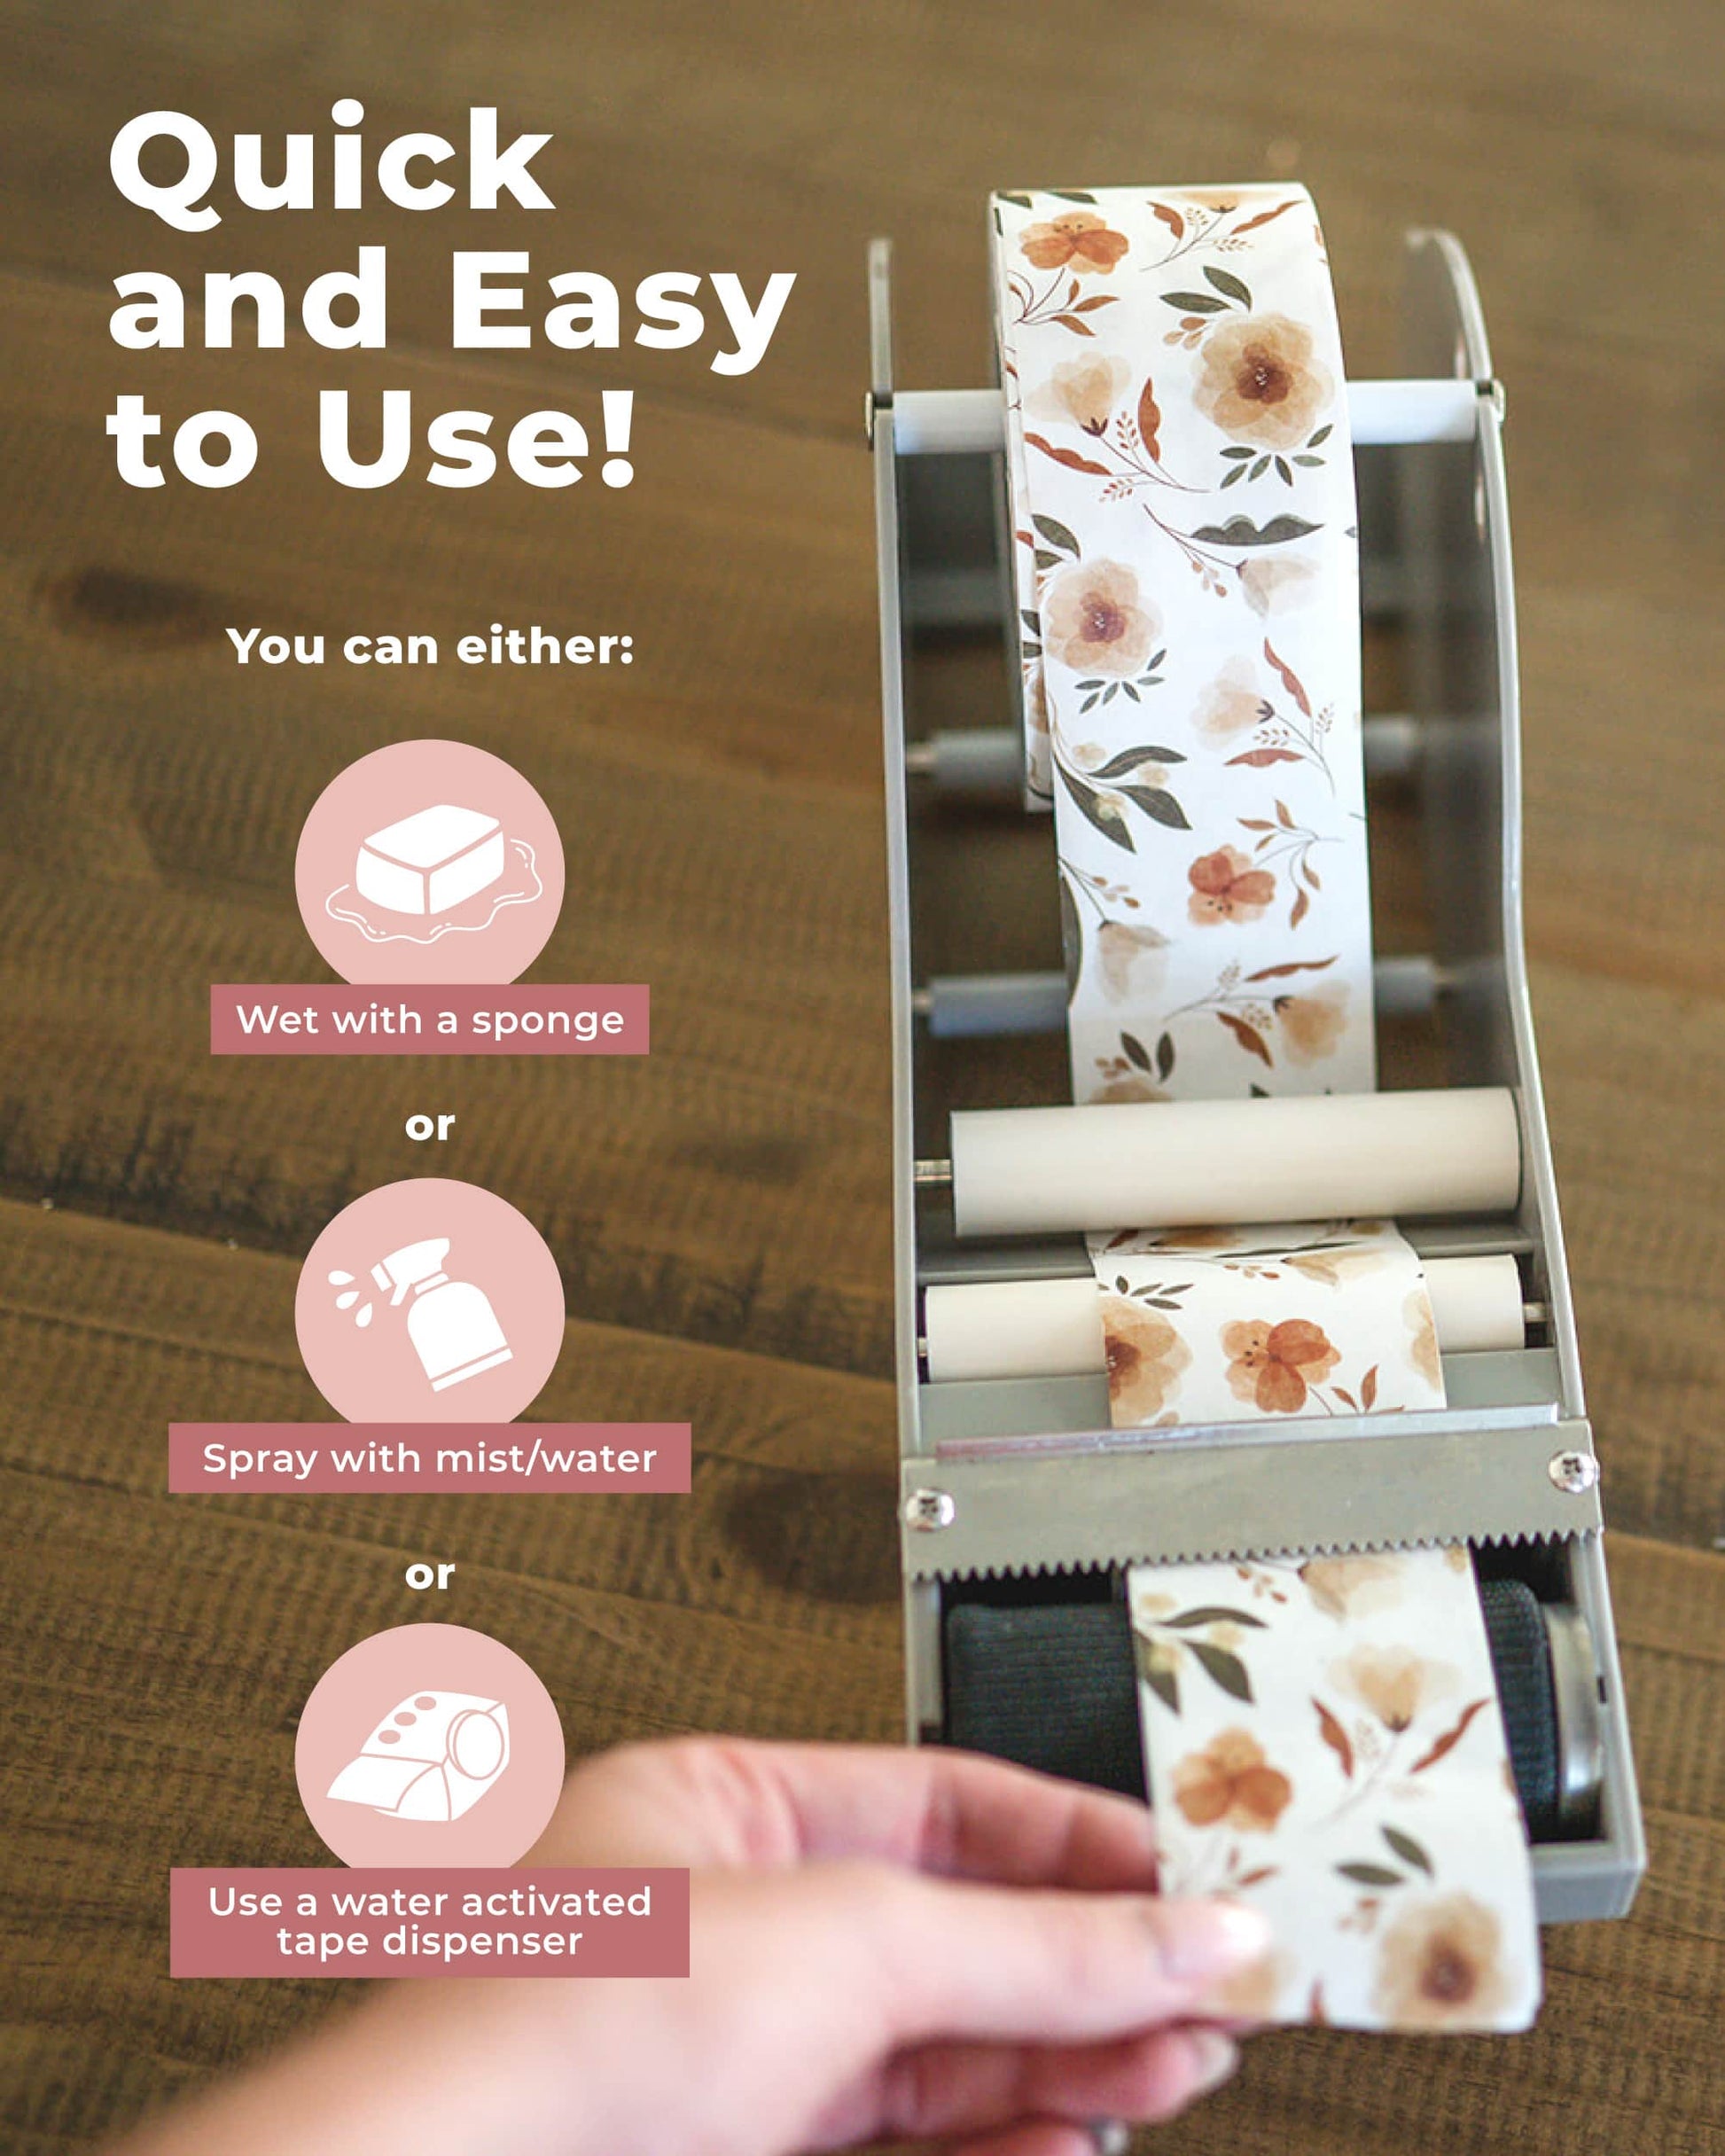 Quick and easy to use Packing Tape - Floral Rosy Brown dispenser from impack.co.